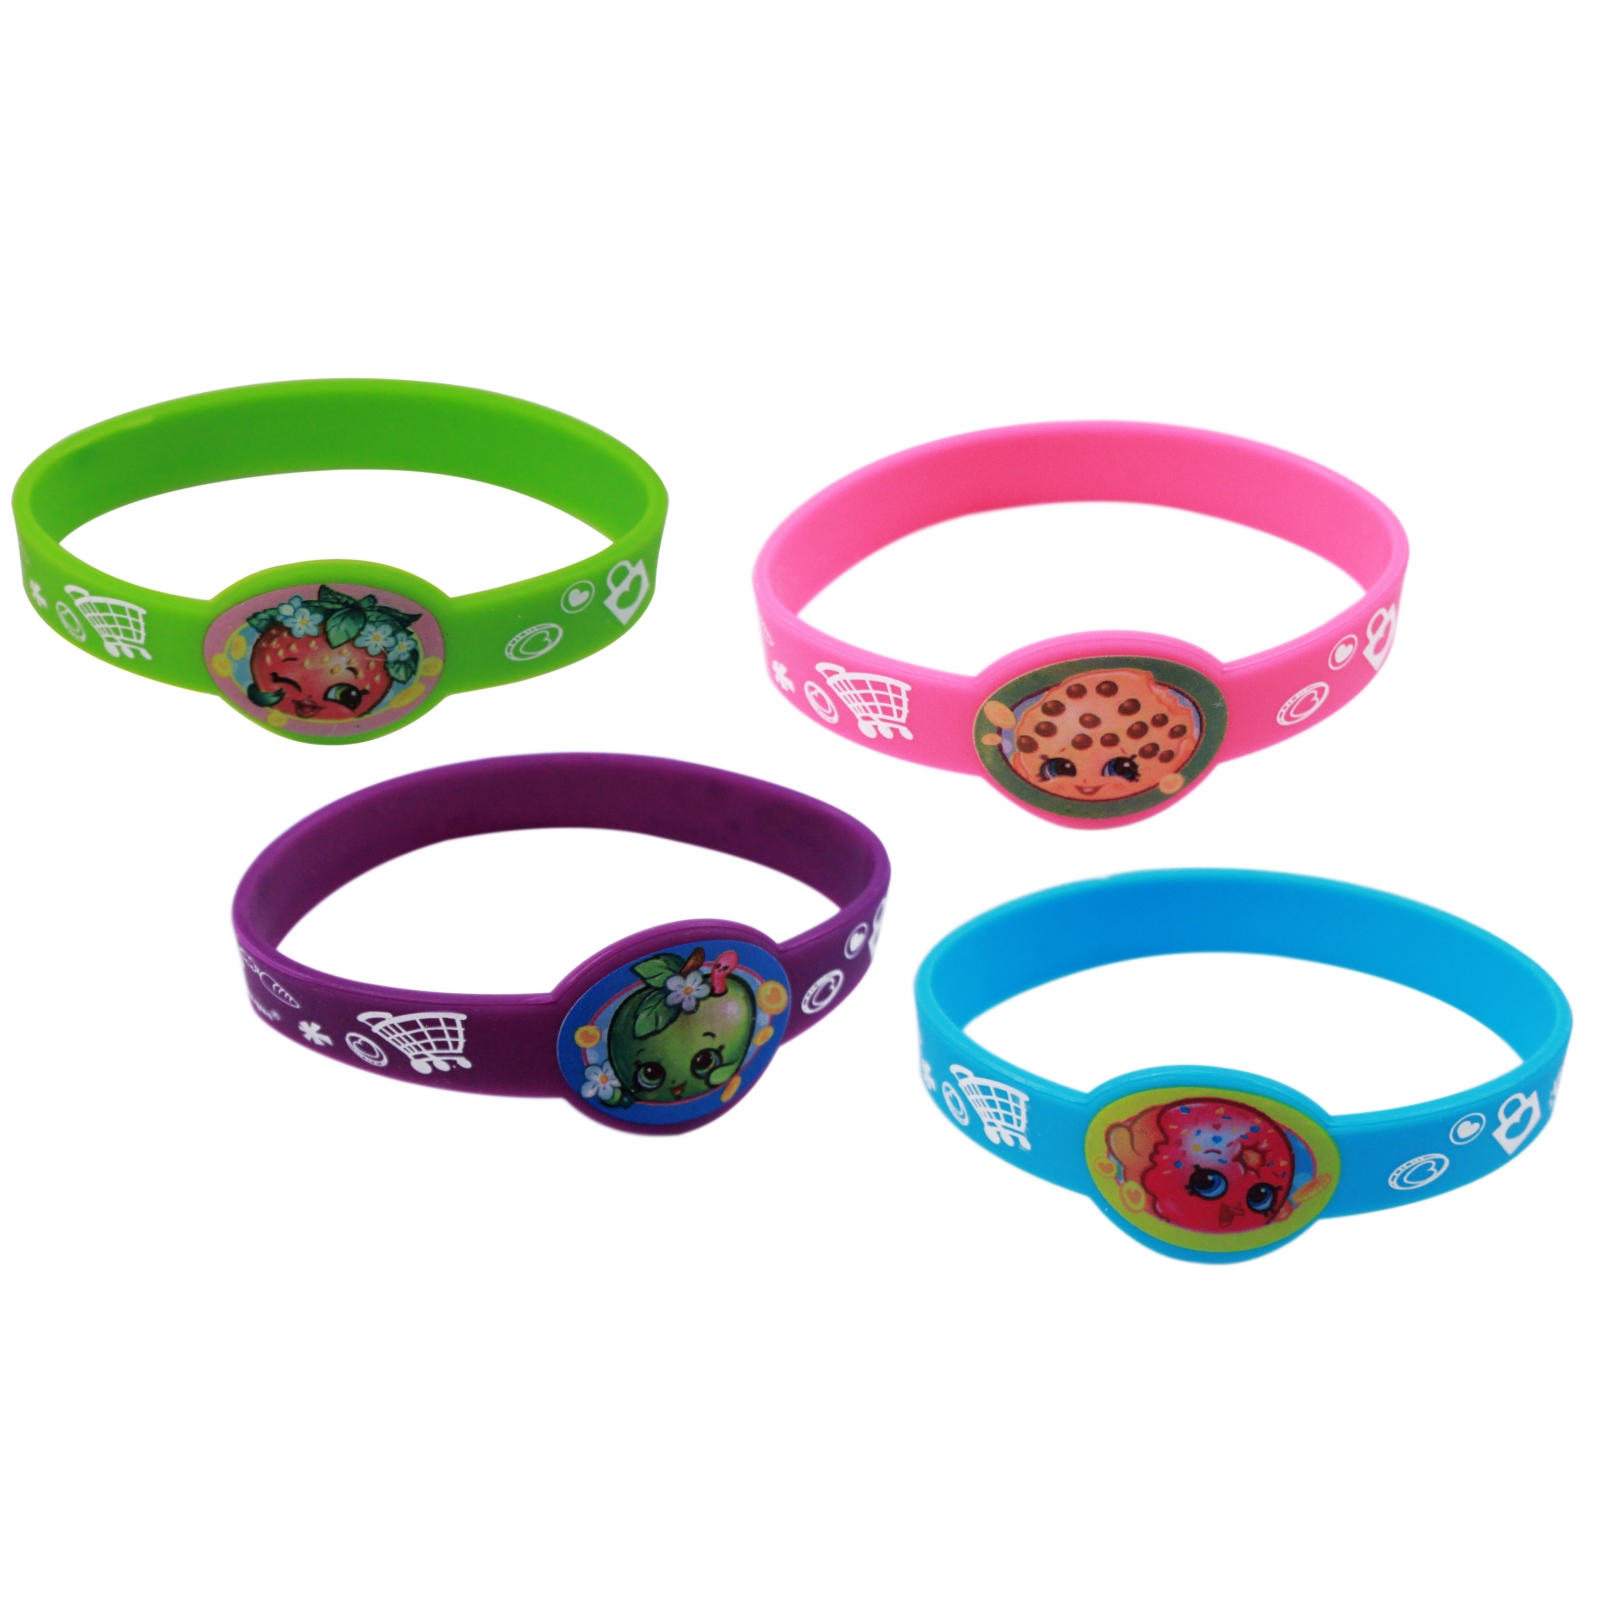 KidPlay Products 4pc Shopkins Stretchy Silicone Bracelets Gift Set D'Lish Donut Apple Blossom